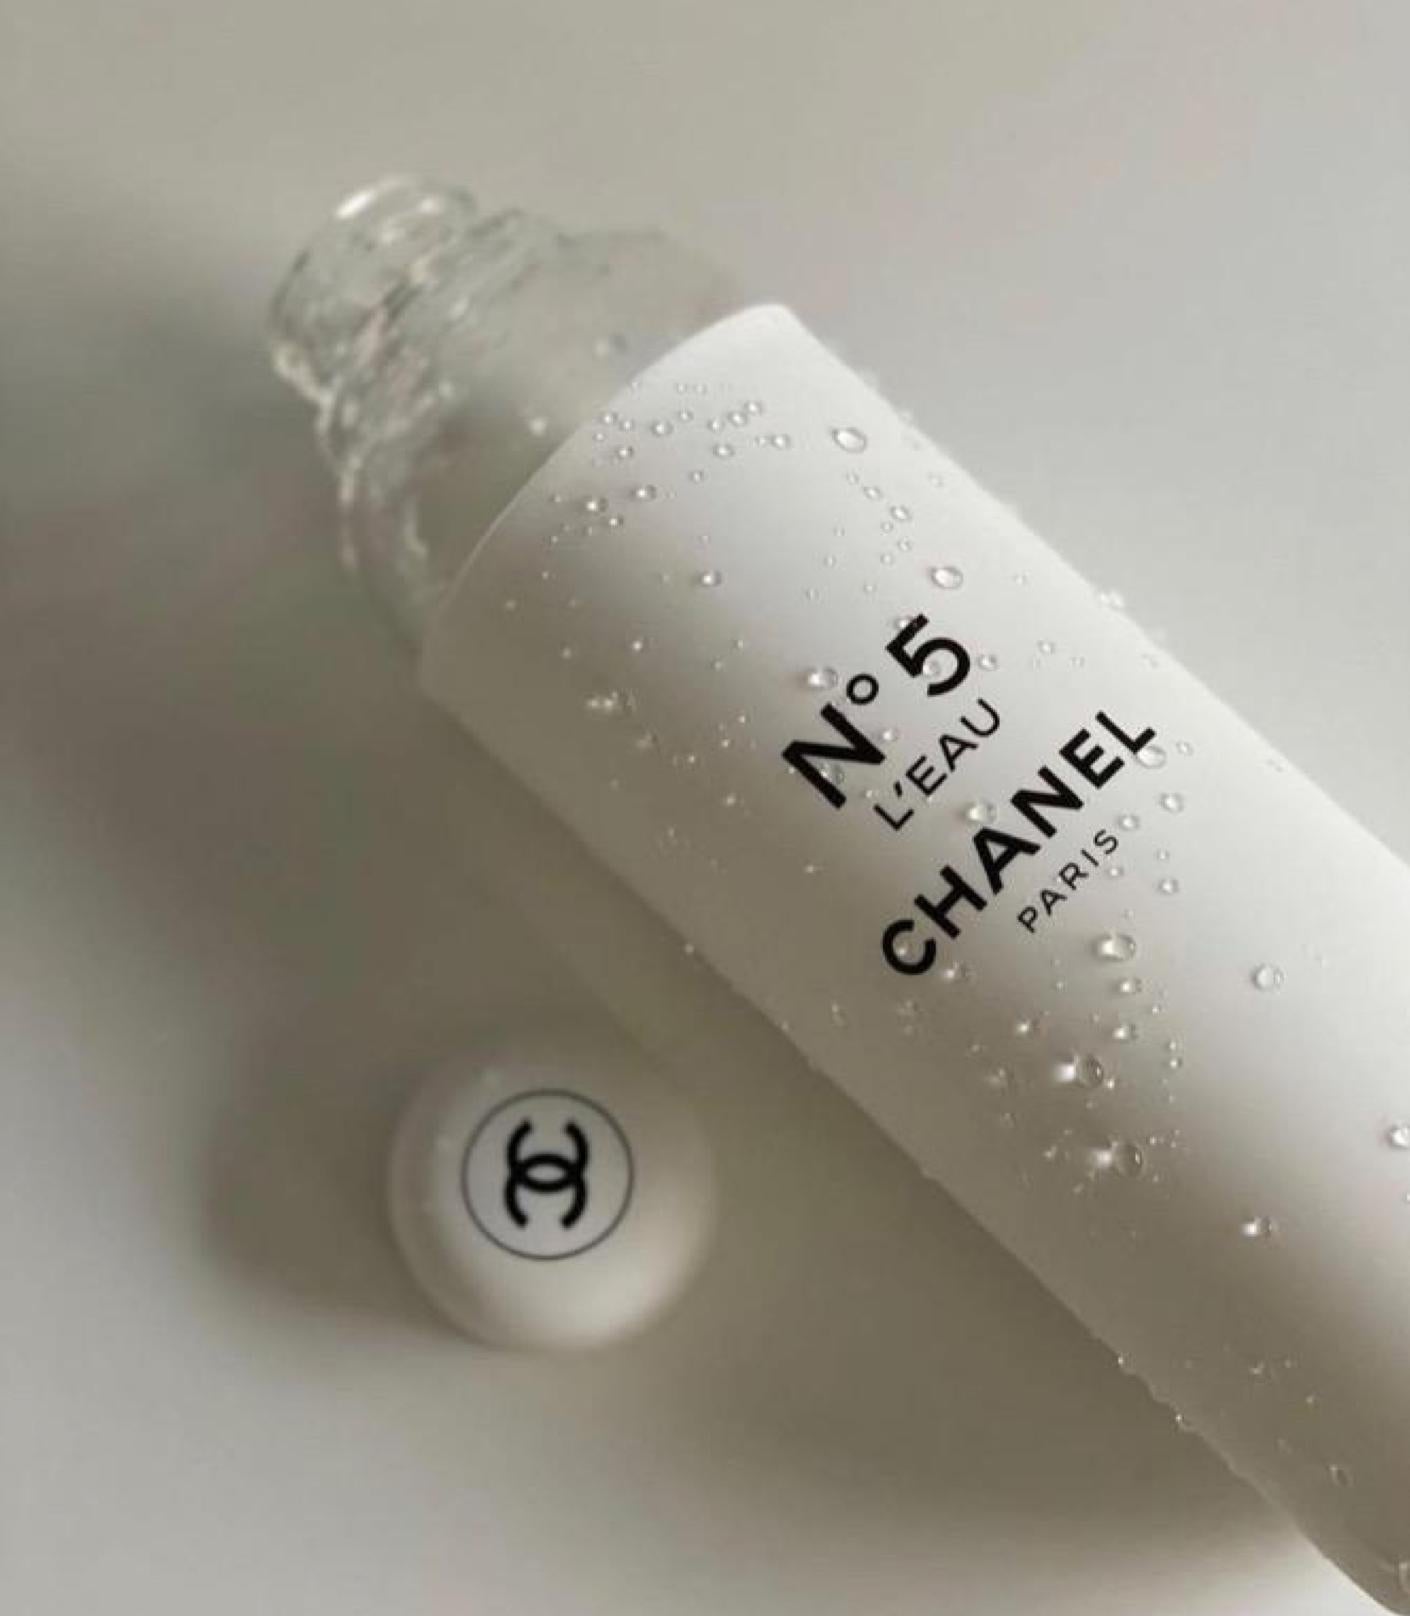 Chanel Paris N5 Water Bottle - Limited Edition